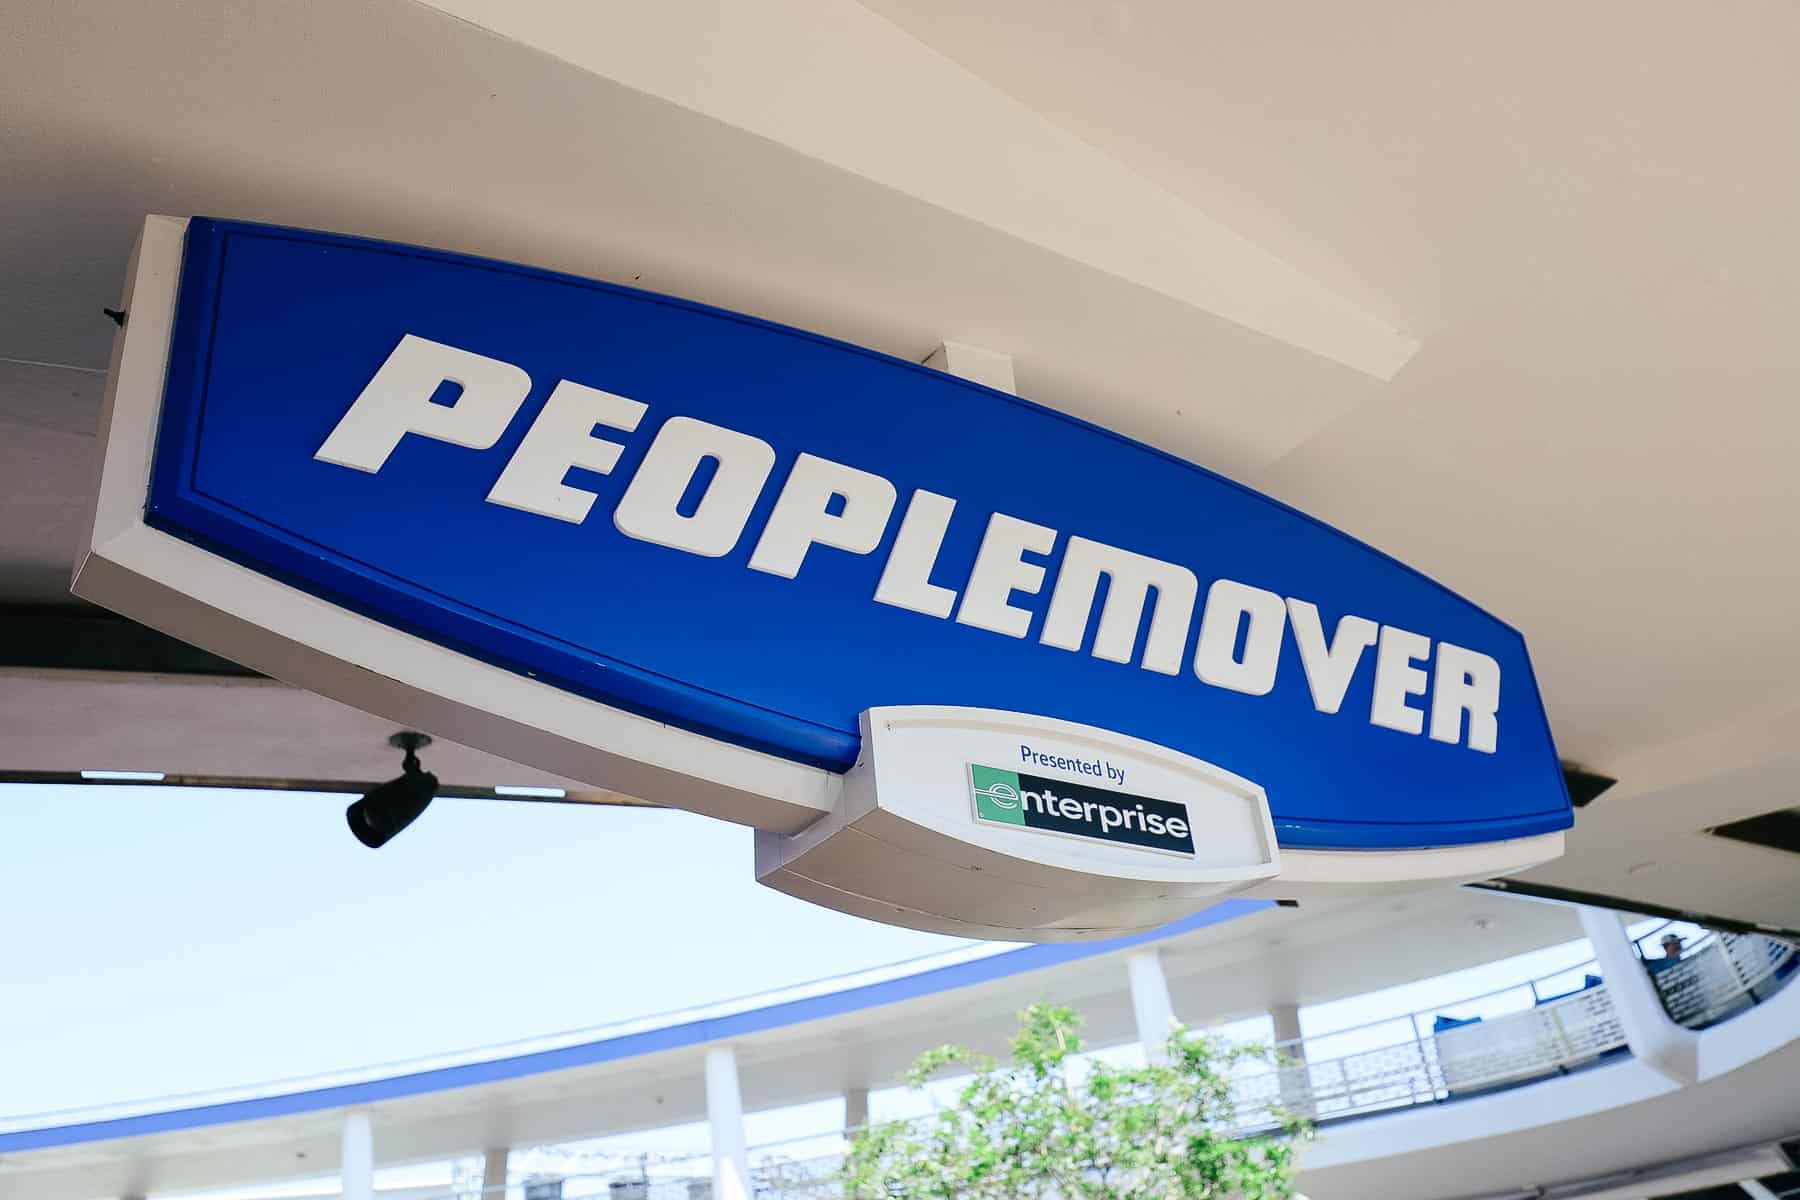 Peoplemover sign that says presented by Enterprise 